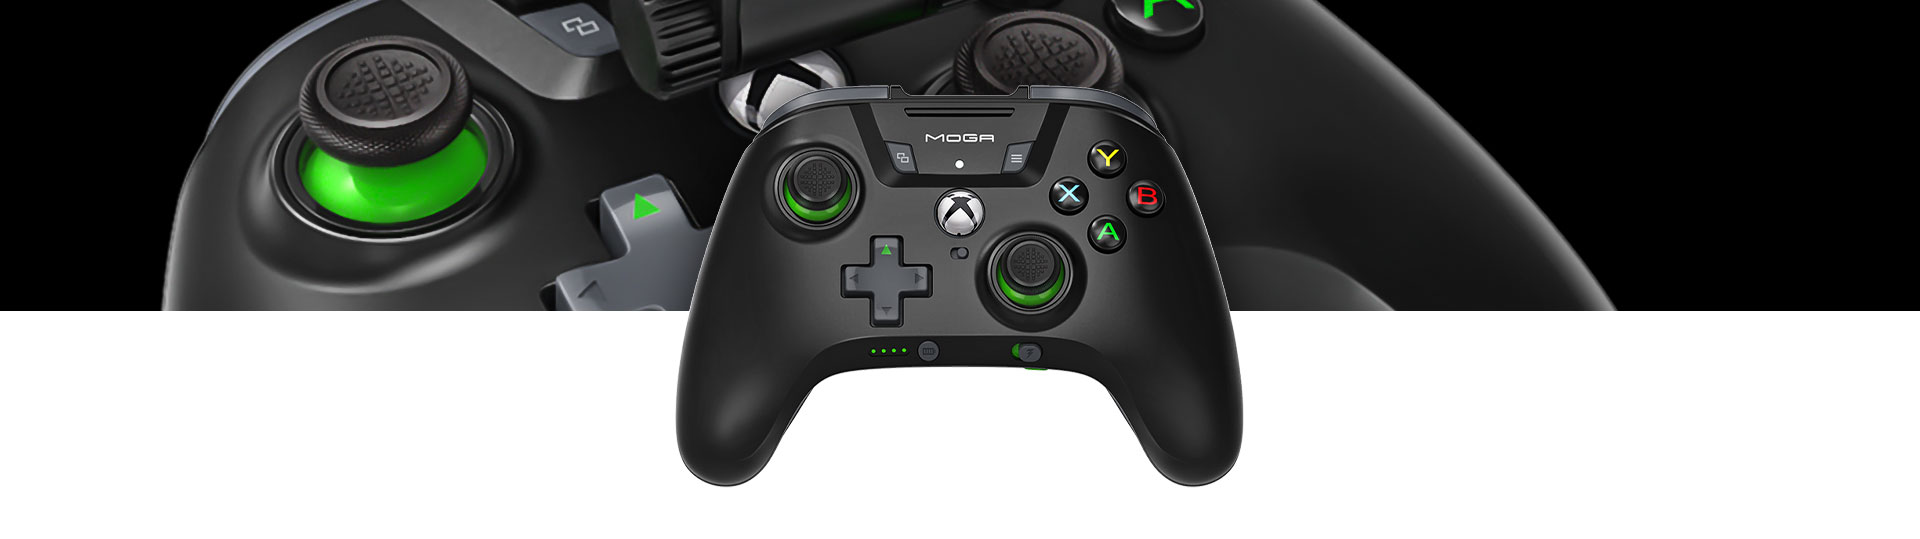 MOGA XP5-X Plus Bluetooth Controller for Mobile & Cloud Gaming with a close-up of controller surface texture